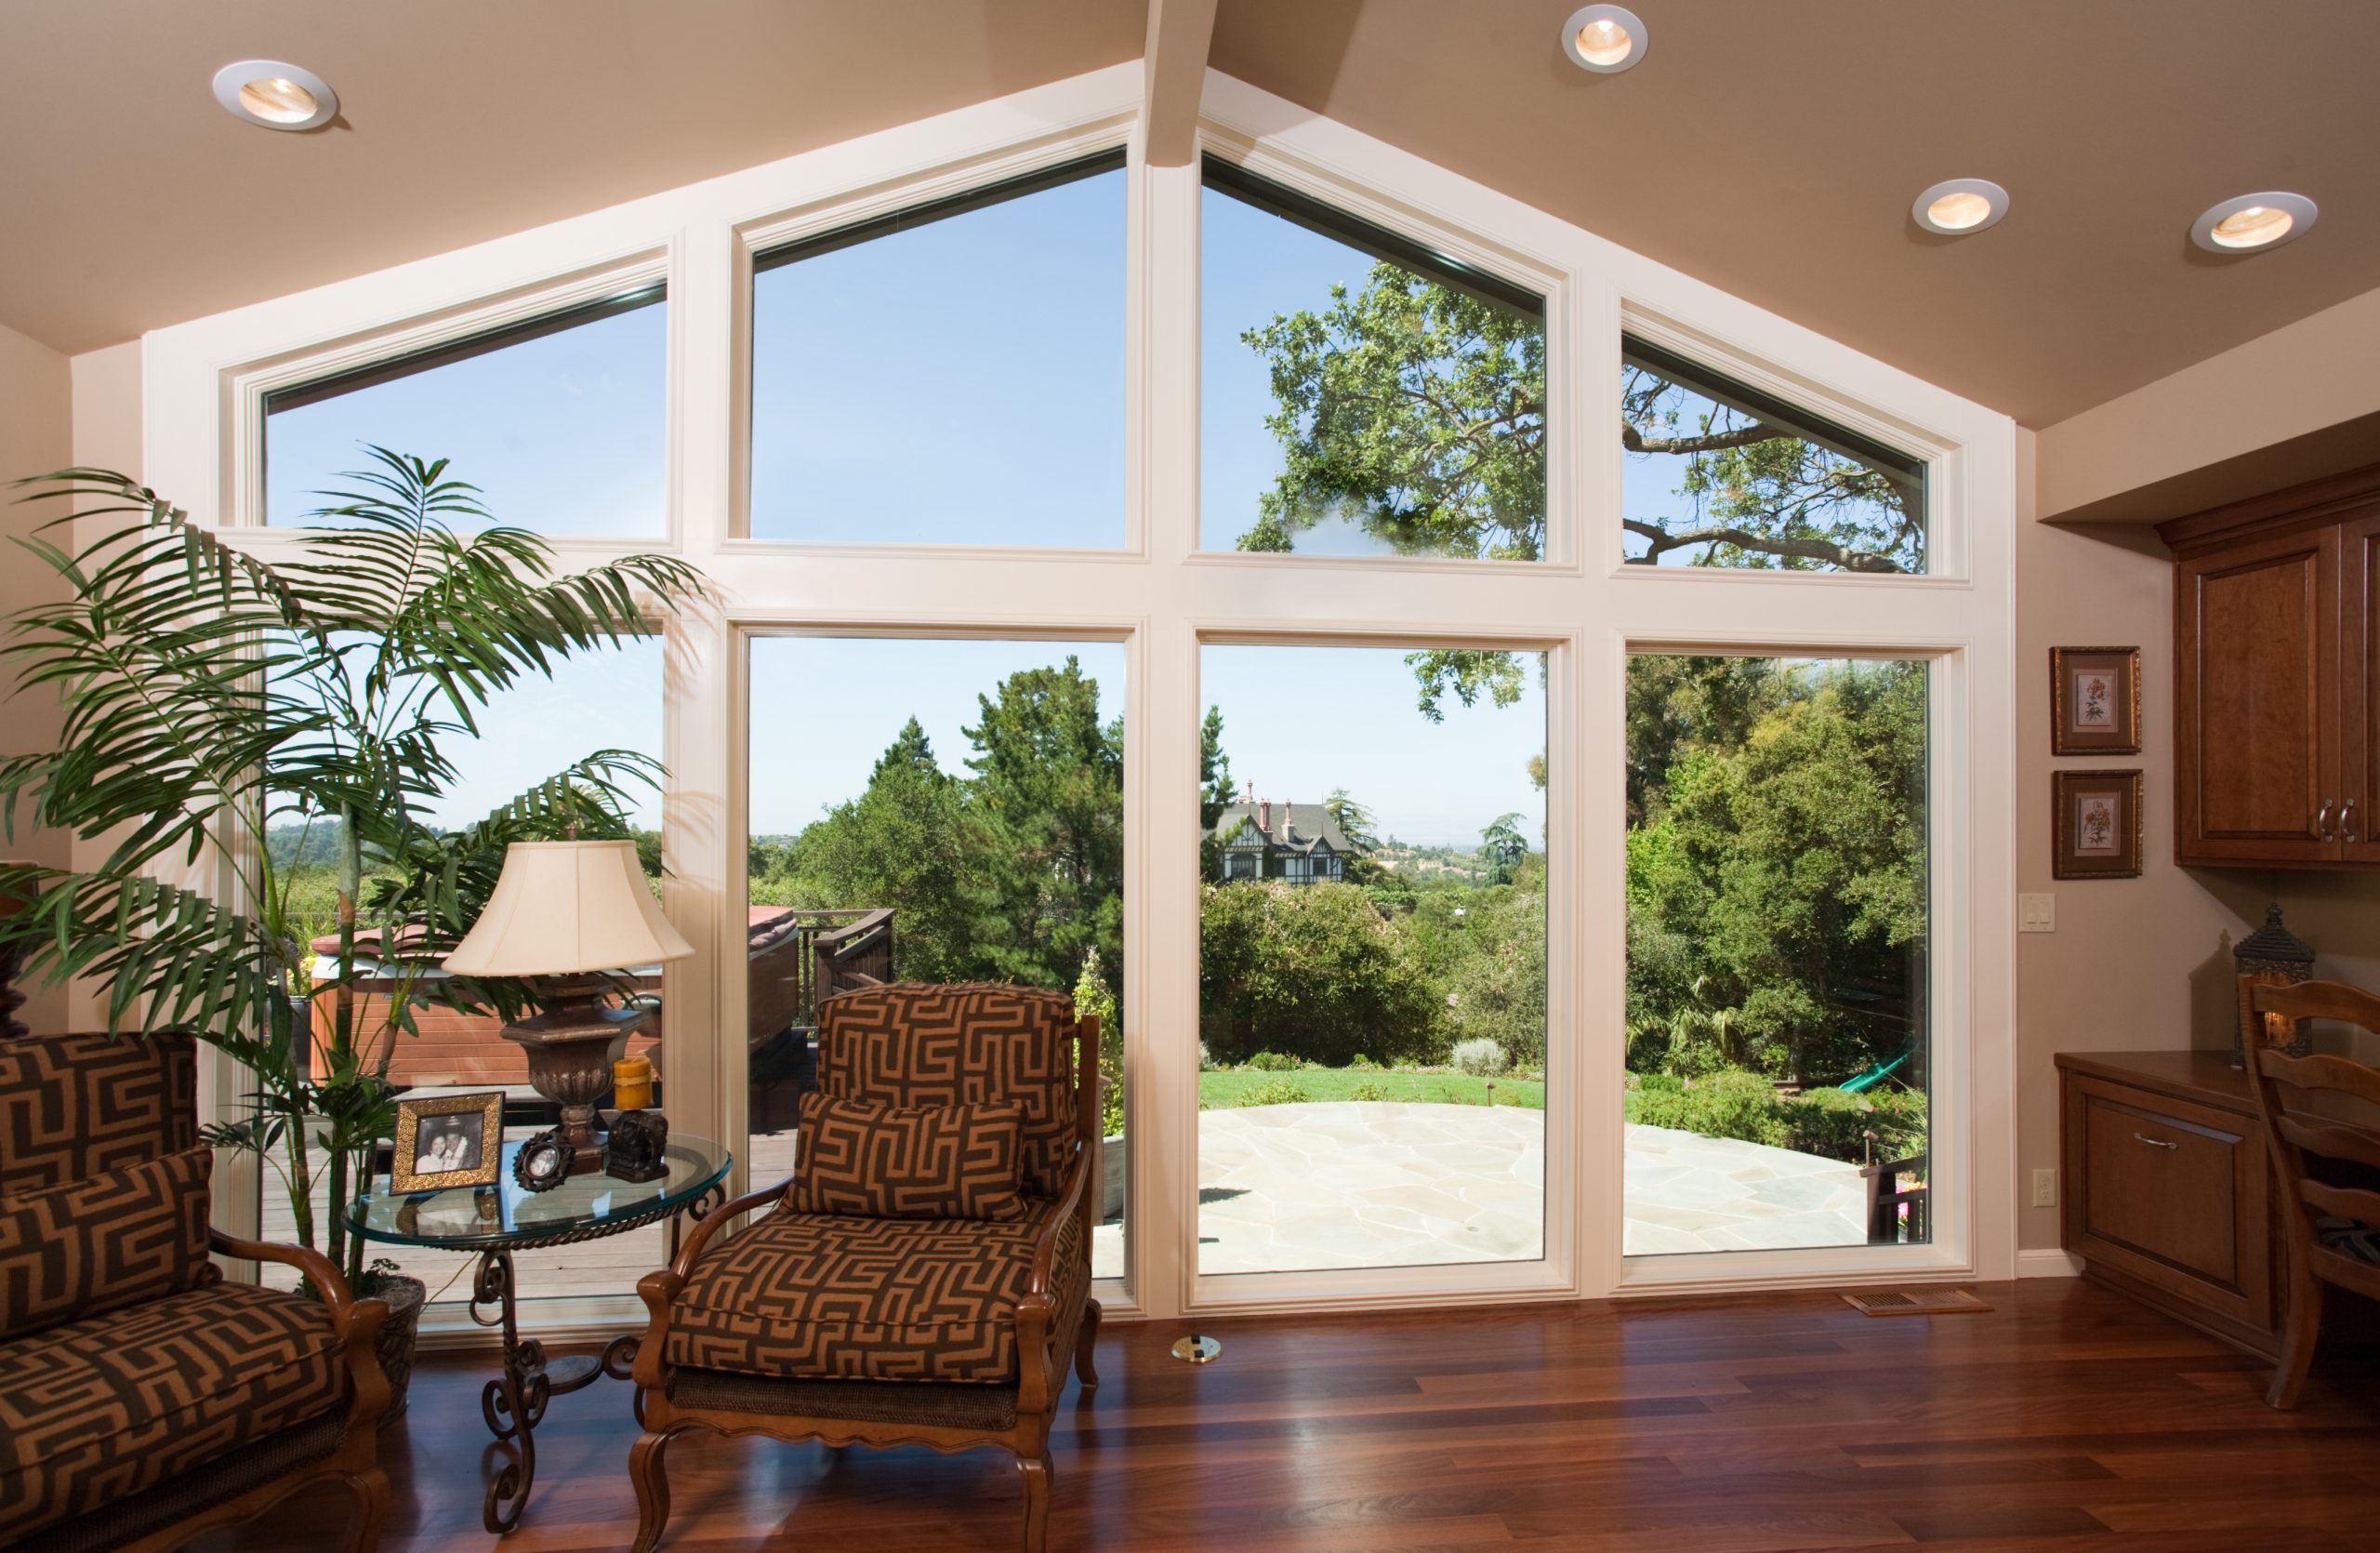 Large floor to ceiling windows with lots of natural light.